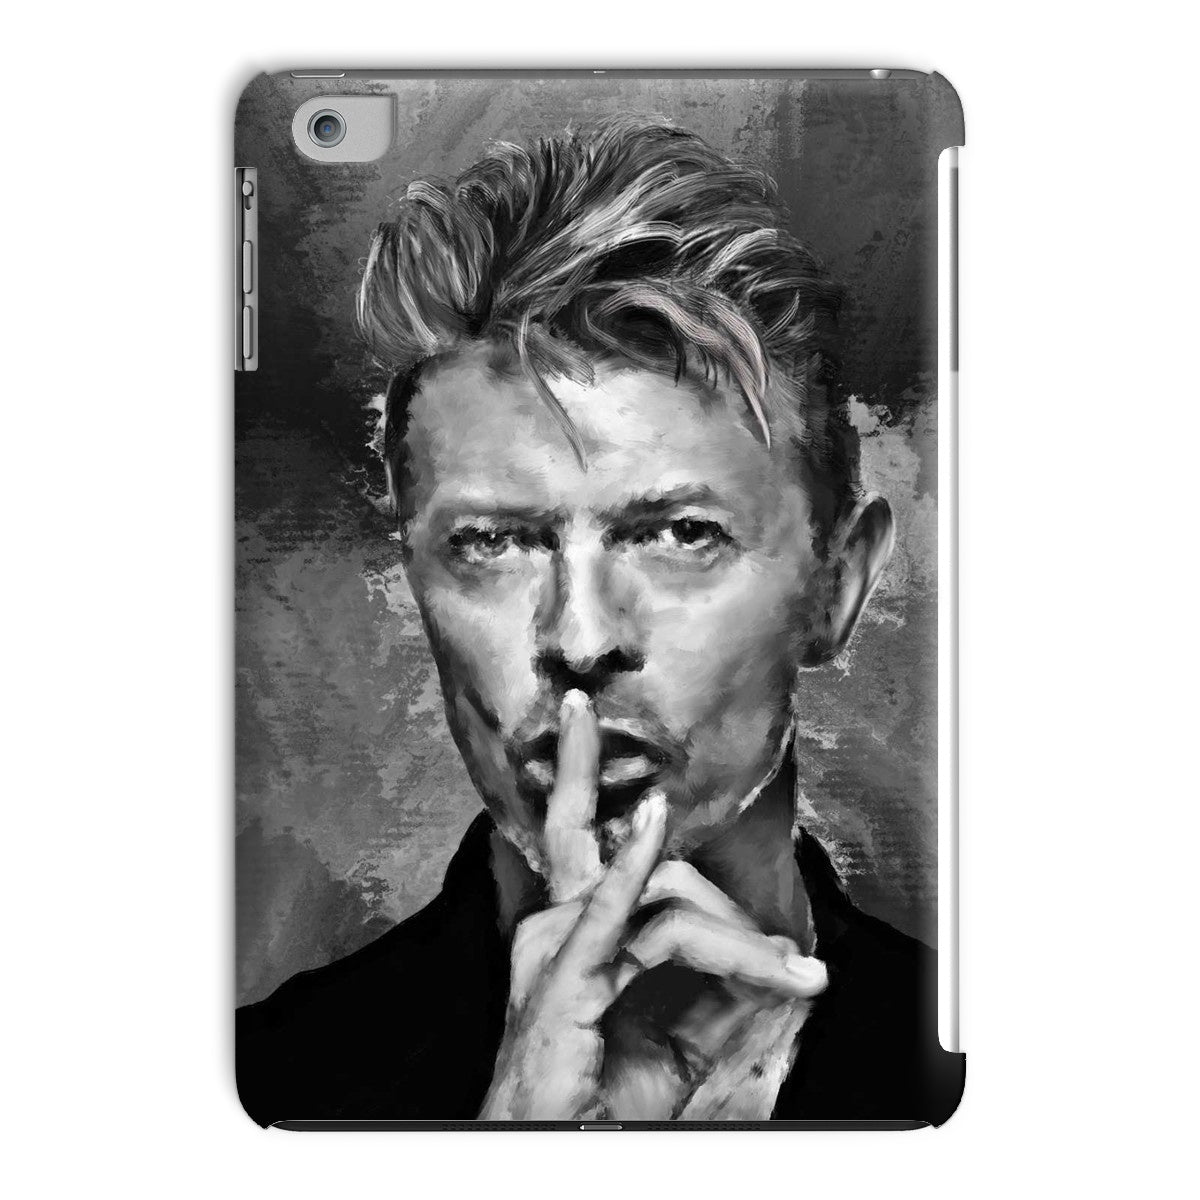 Bowie 'Shhh!' Painting Tablet Cases